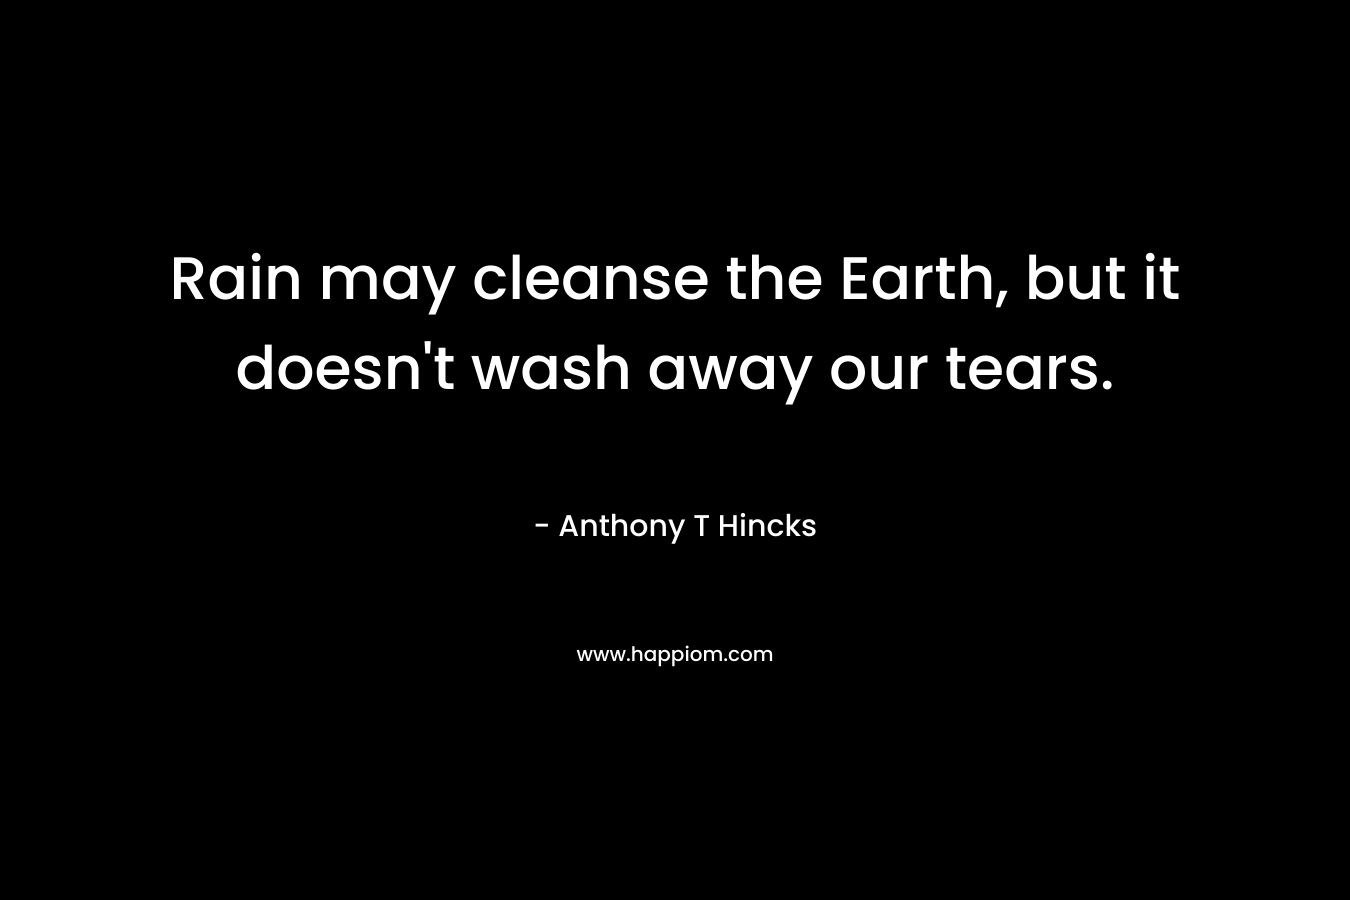 Rain may cleanse the Earth, but it doesn’t wash away our tears. – Anthony T Hincks